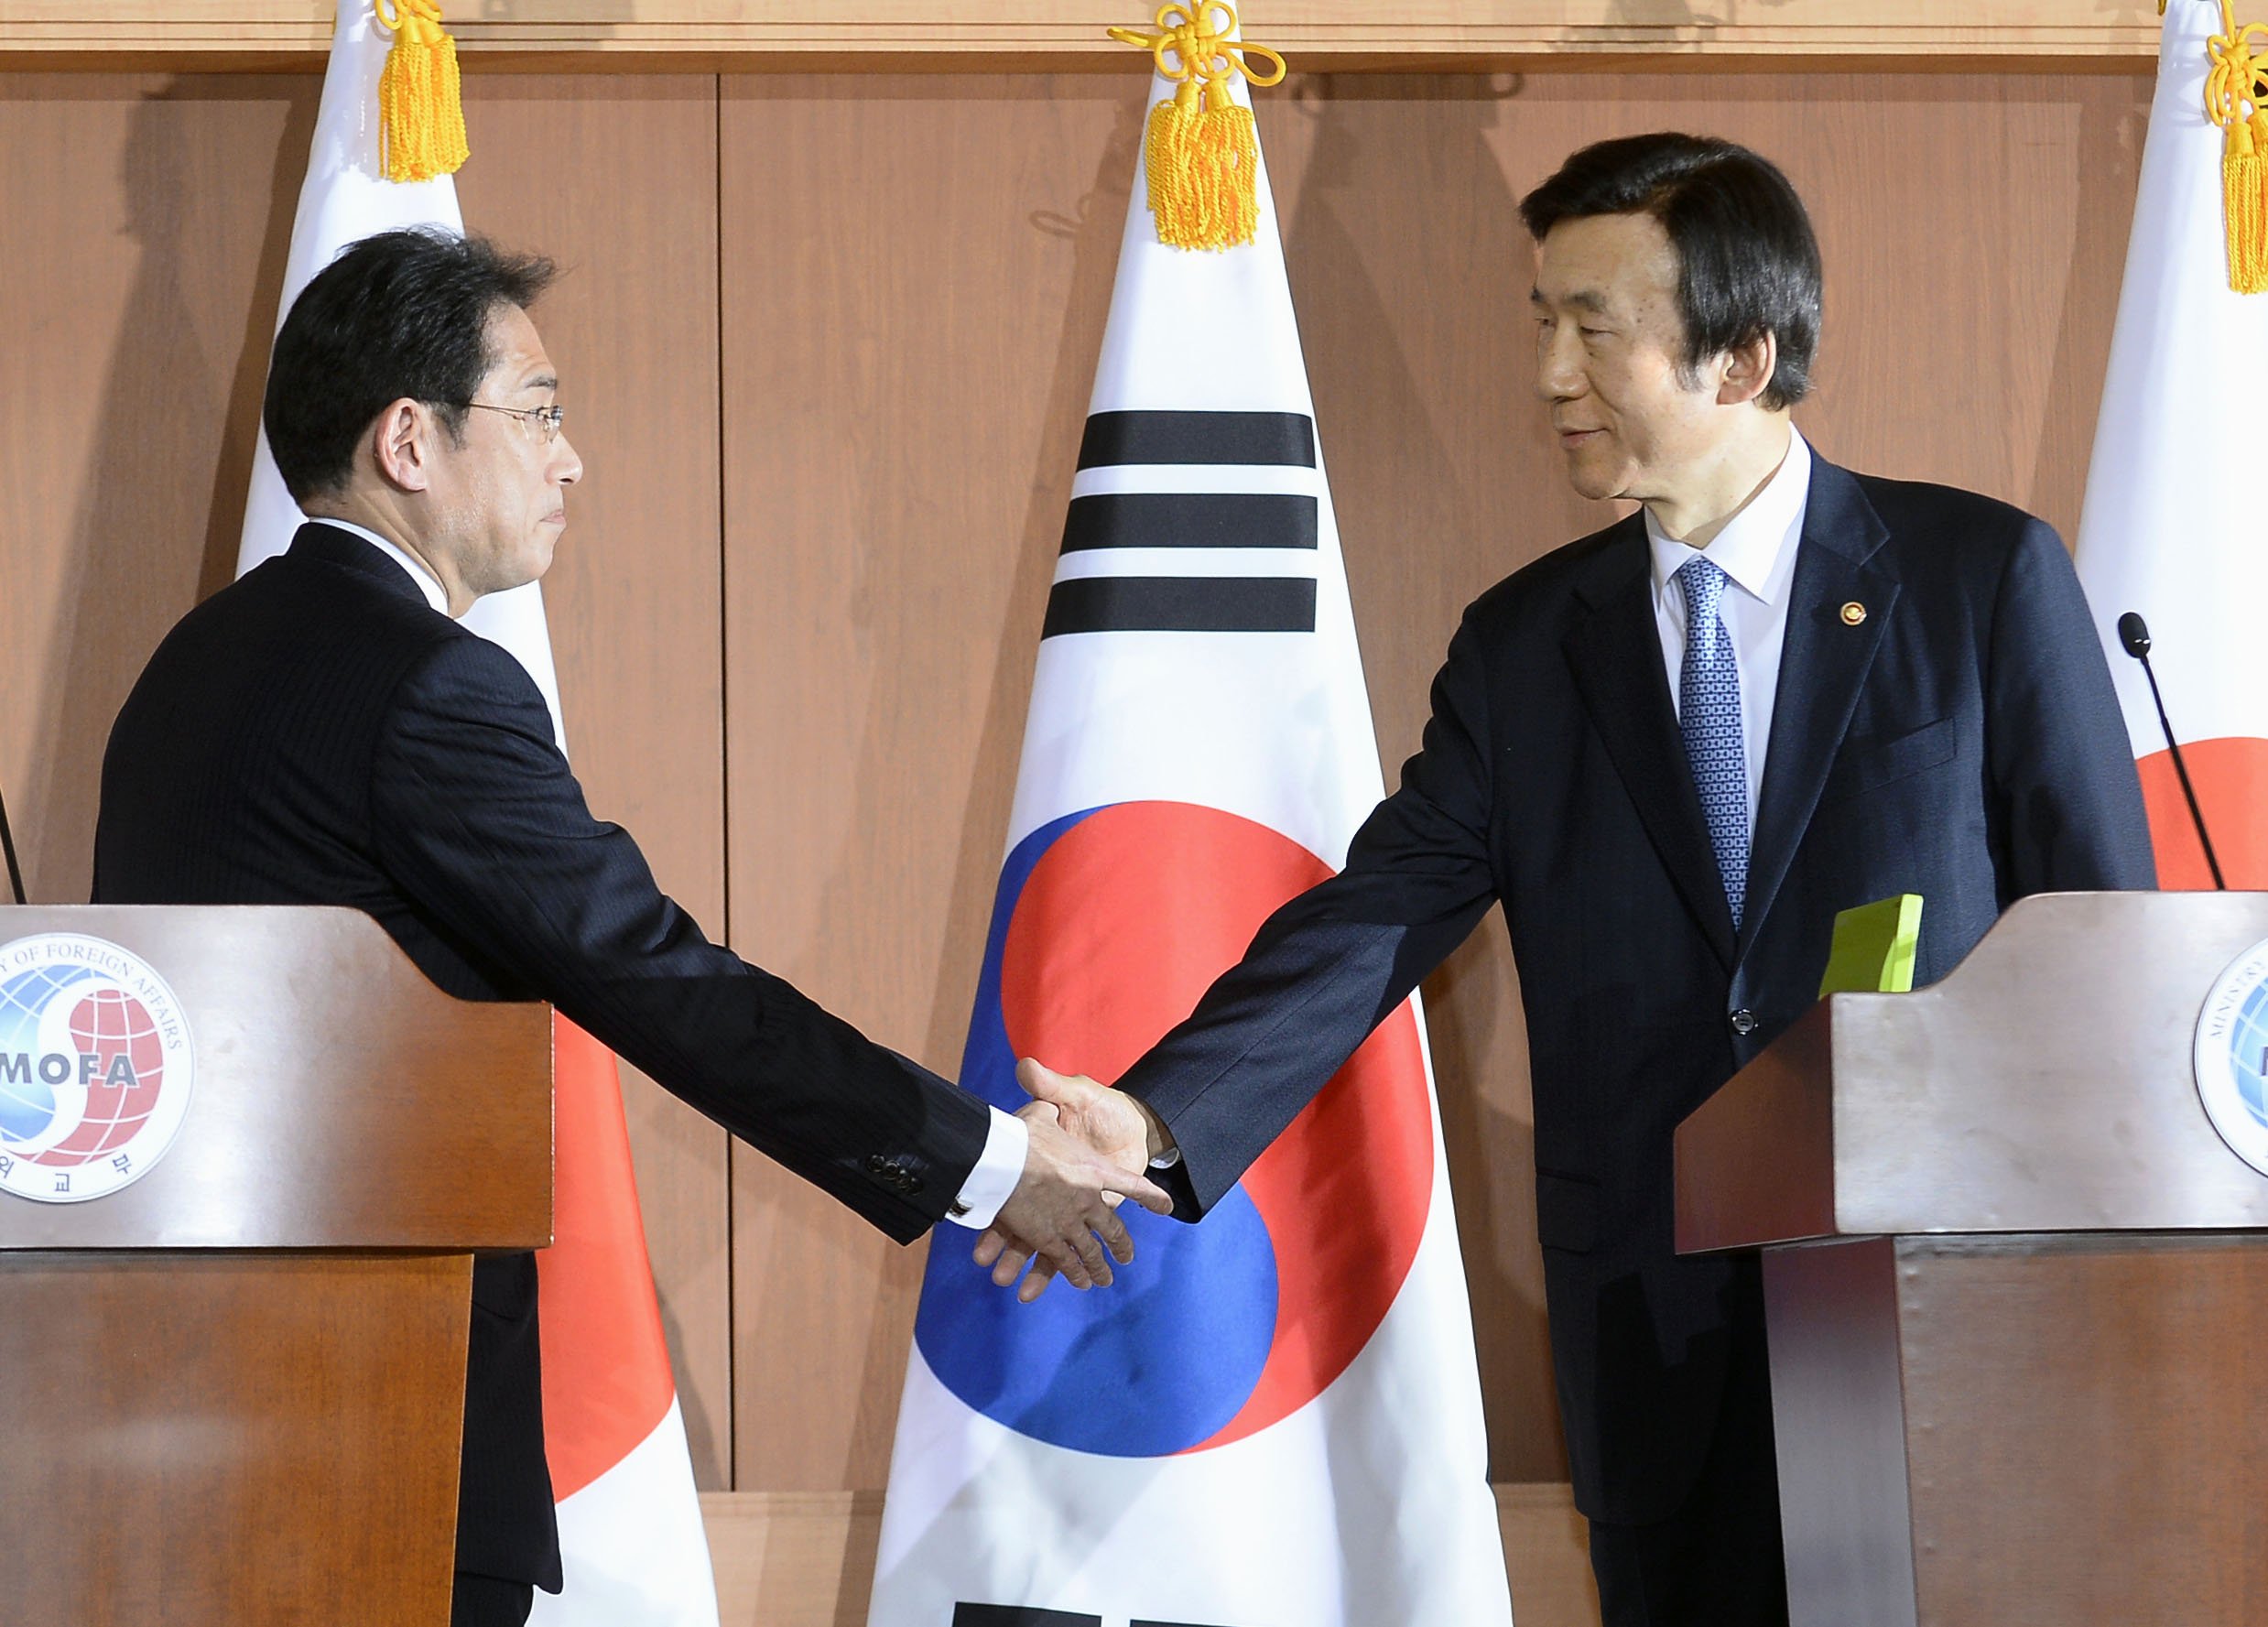 Japanese Foreign Minister Fumio Kishida (L) and his South Korean counterpart Yun Byung Se shake hands after a joint press conference at the South Korean Foreign Ministry in Seoul on Dec. 28, 2015. The two countries agreed on a set of measures the same day to bring a "final and irreversible solution" to the issue of women who were forced to work in Japan's wartime military brothels. (Kyodo) ==Kyodo